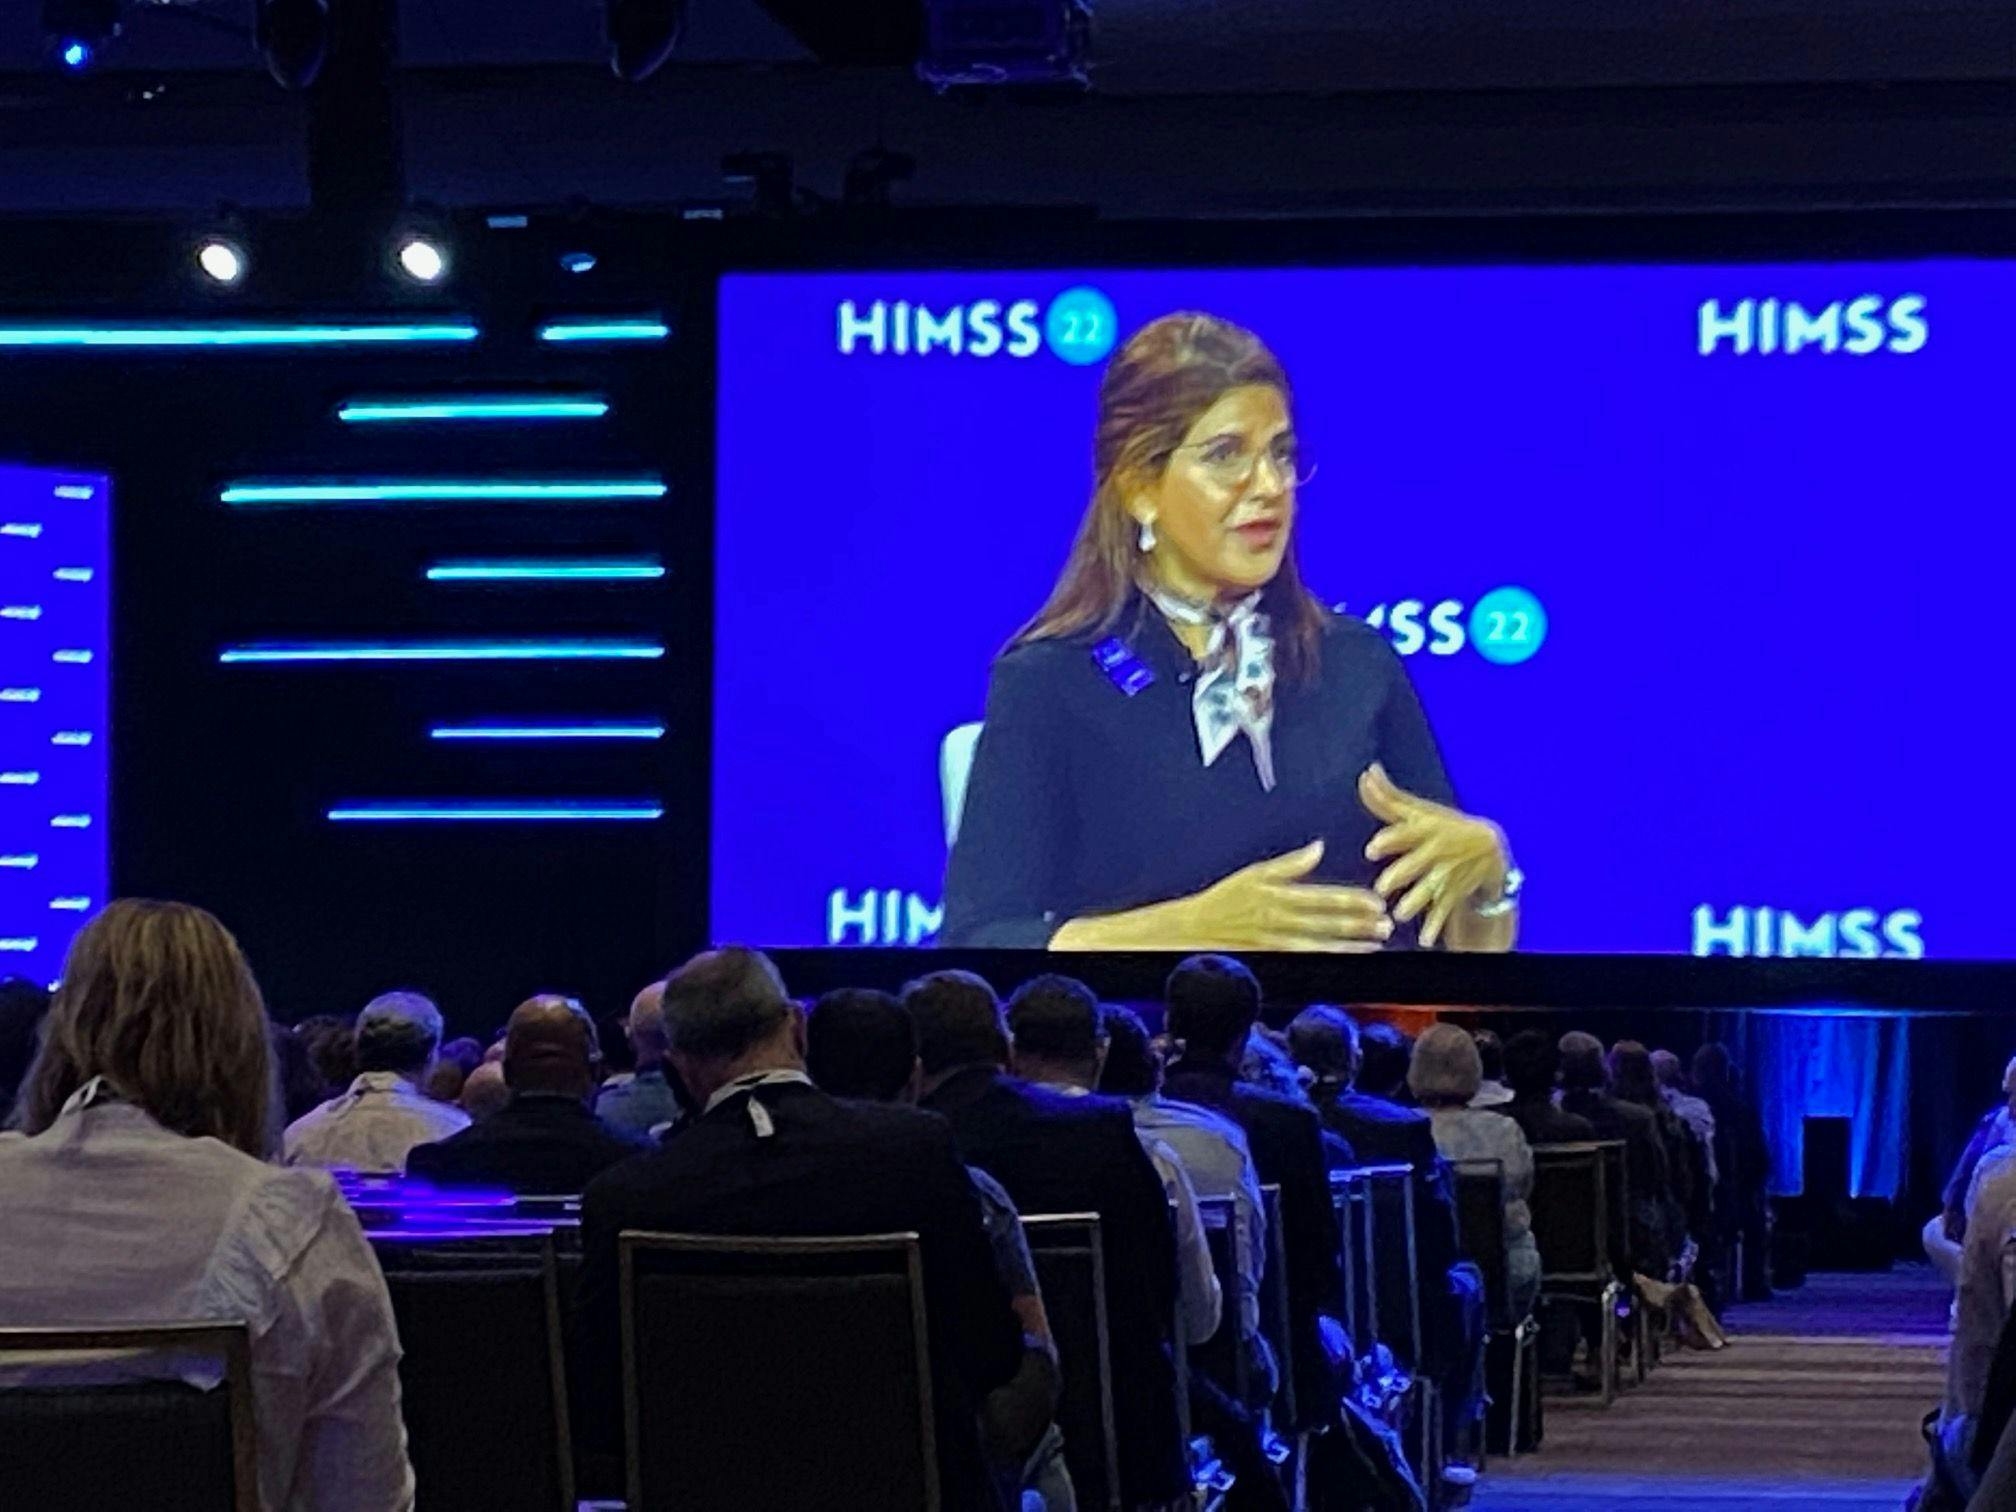 HIMSS 2022: Good workers leave hospitals because of bad managers